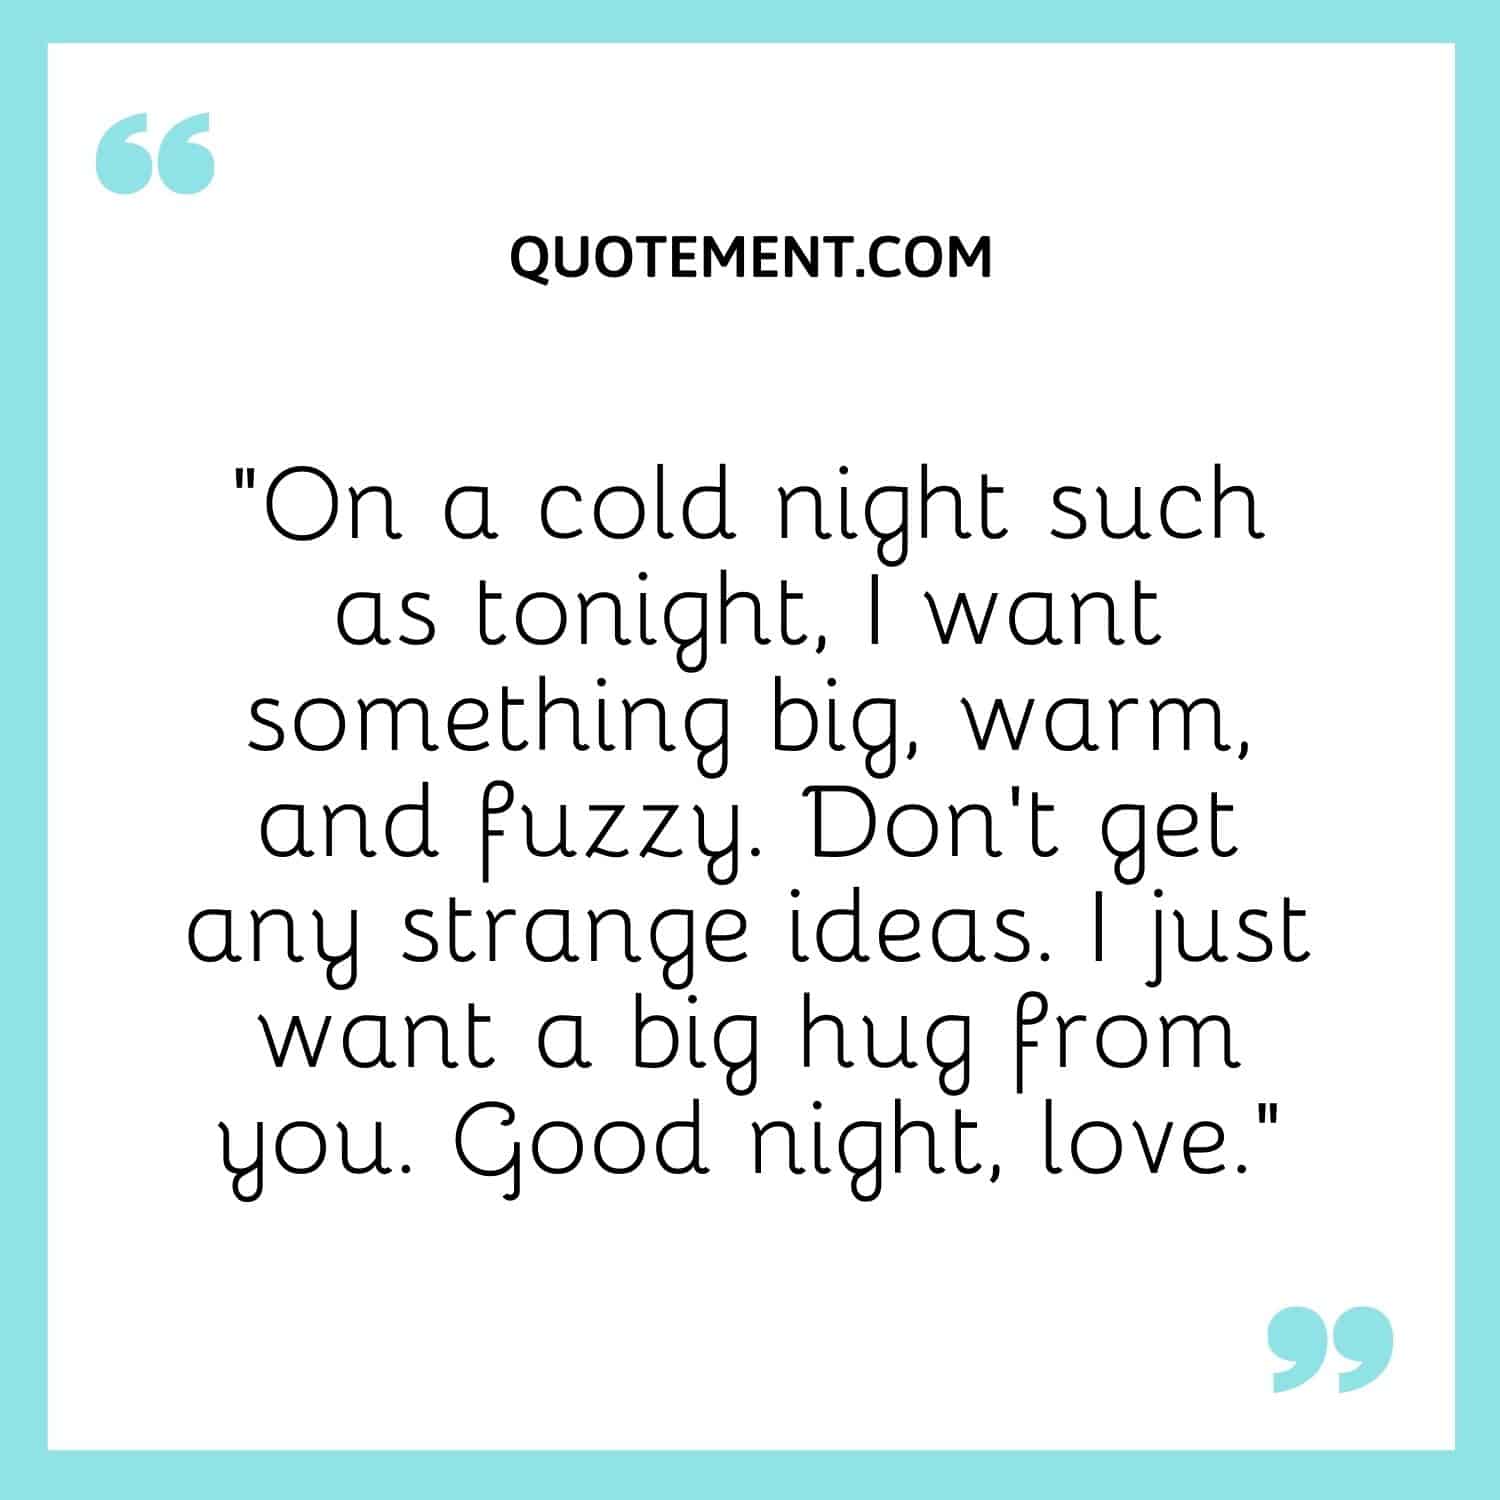 On a cold night such as tonight, I want something big, warm, and fuzzy.